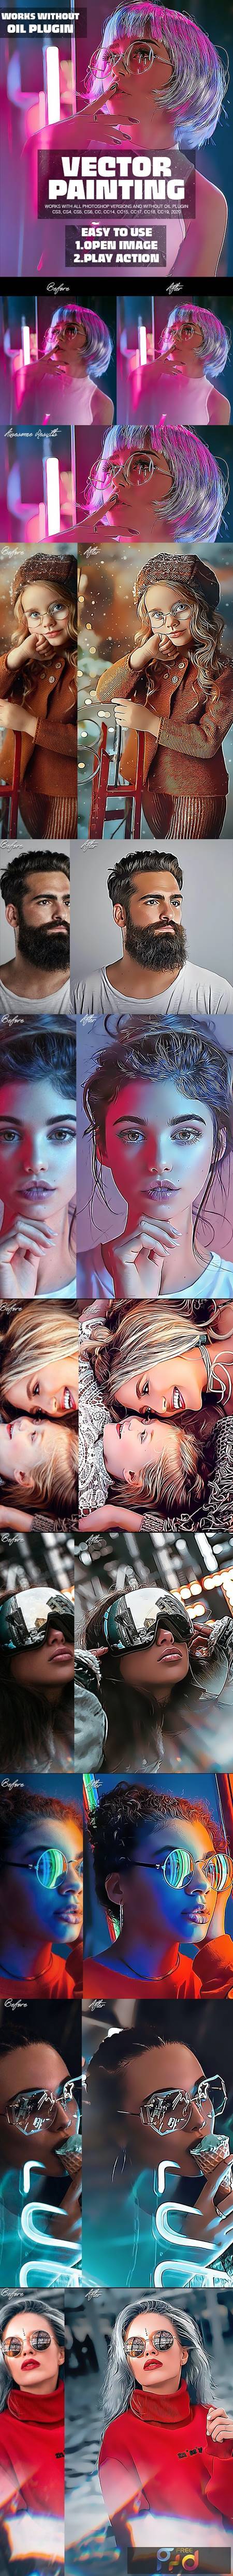 Vector Painting Photoshop Action 26527521 1